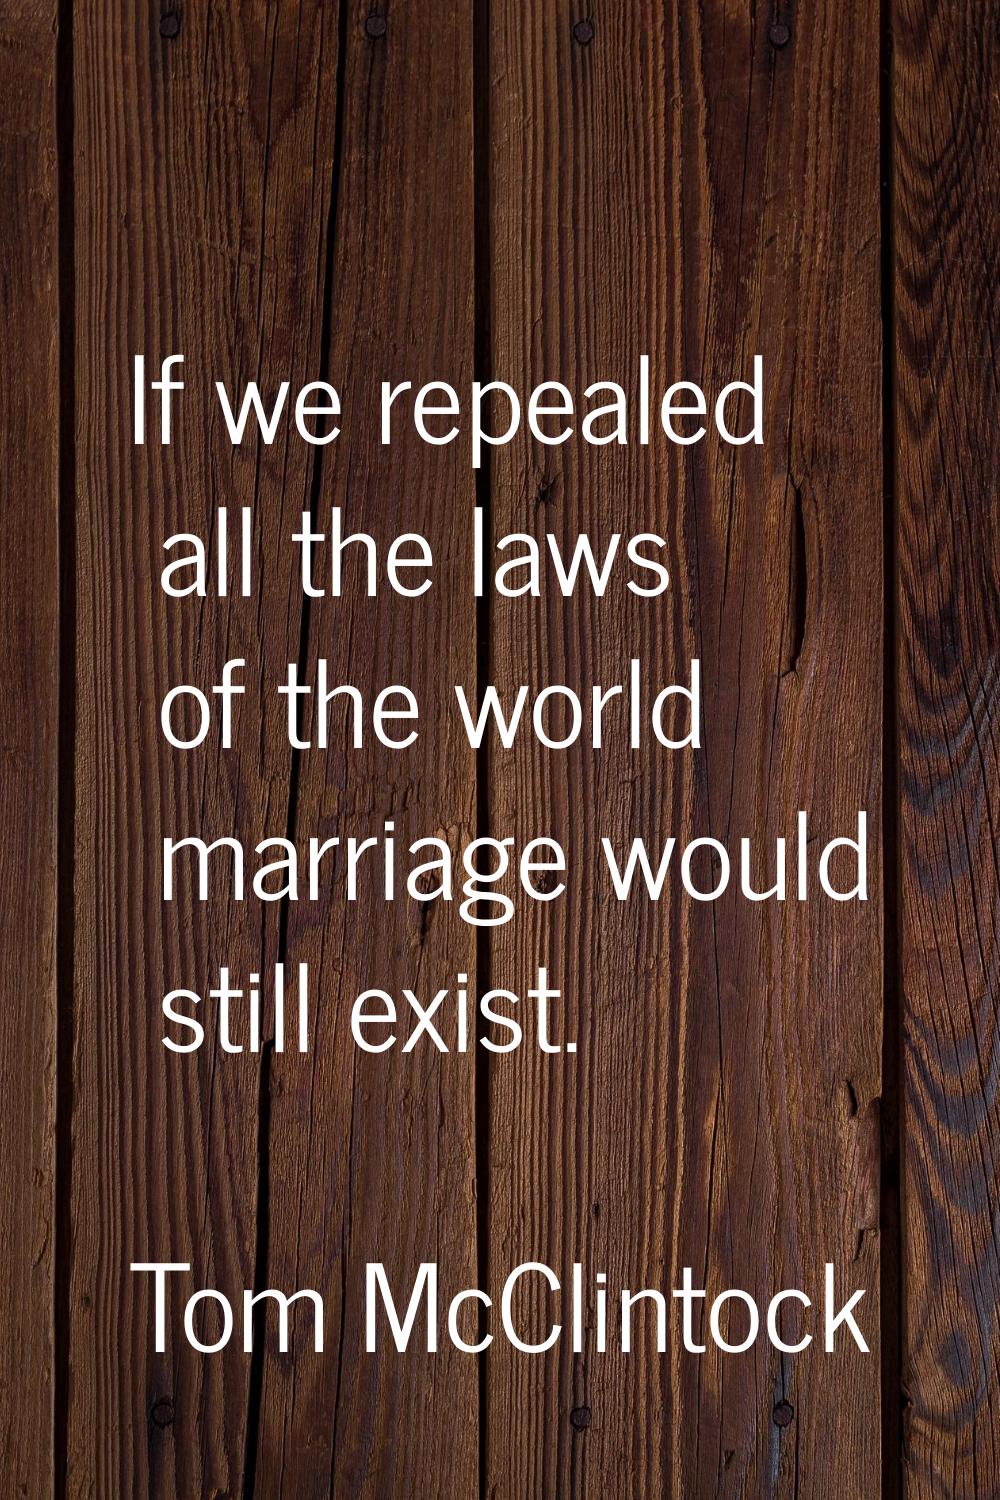 If we repealed all the laws of the world marriage would still exist.